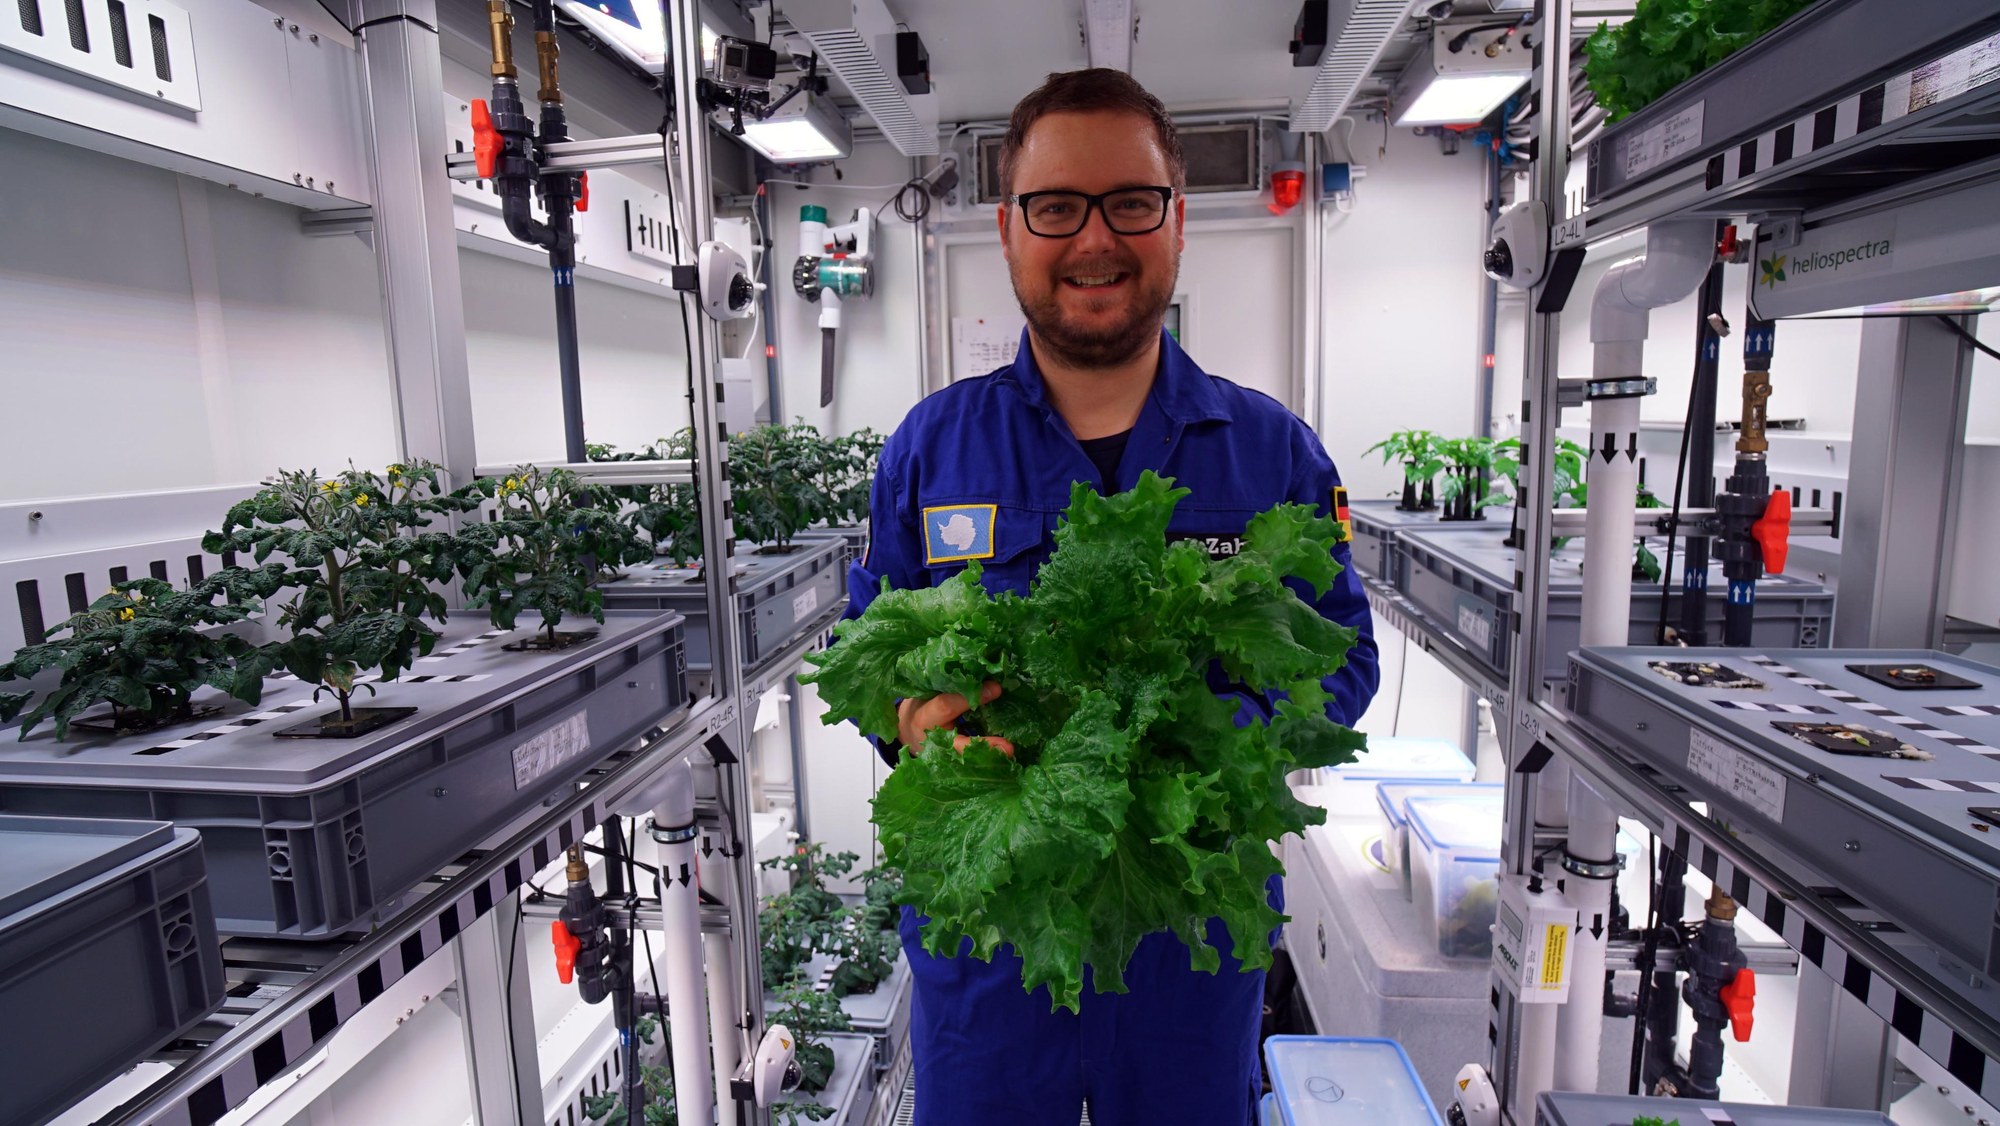 DLR researcher Paul Zabel holds a freshly harvested Antarctic lettuce in his hands